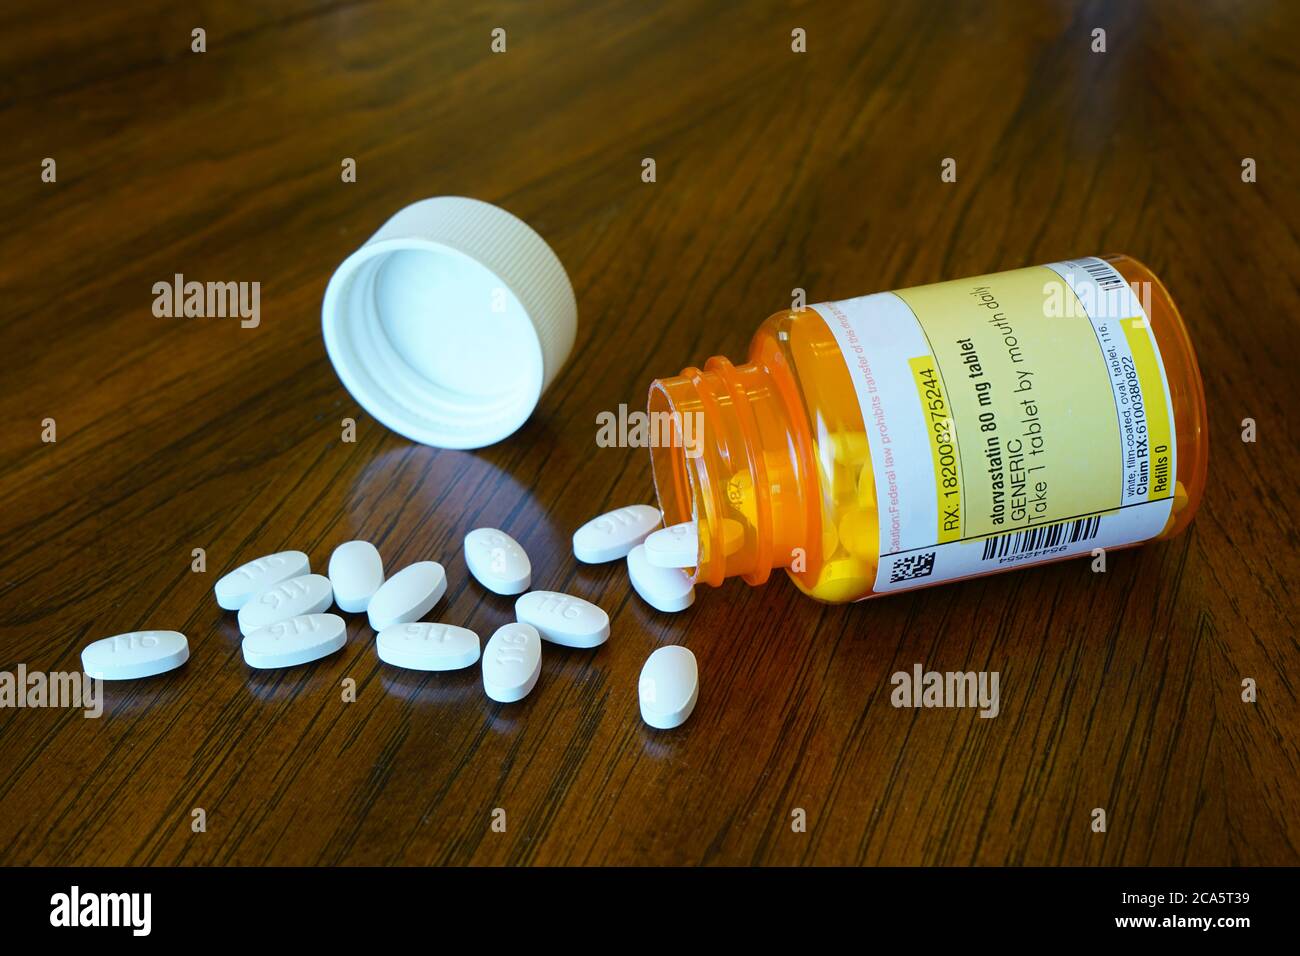 A spilled bottle of cholesterol medication on wood table Stock Photo